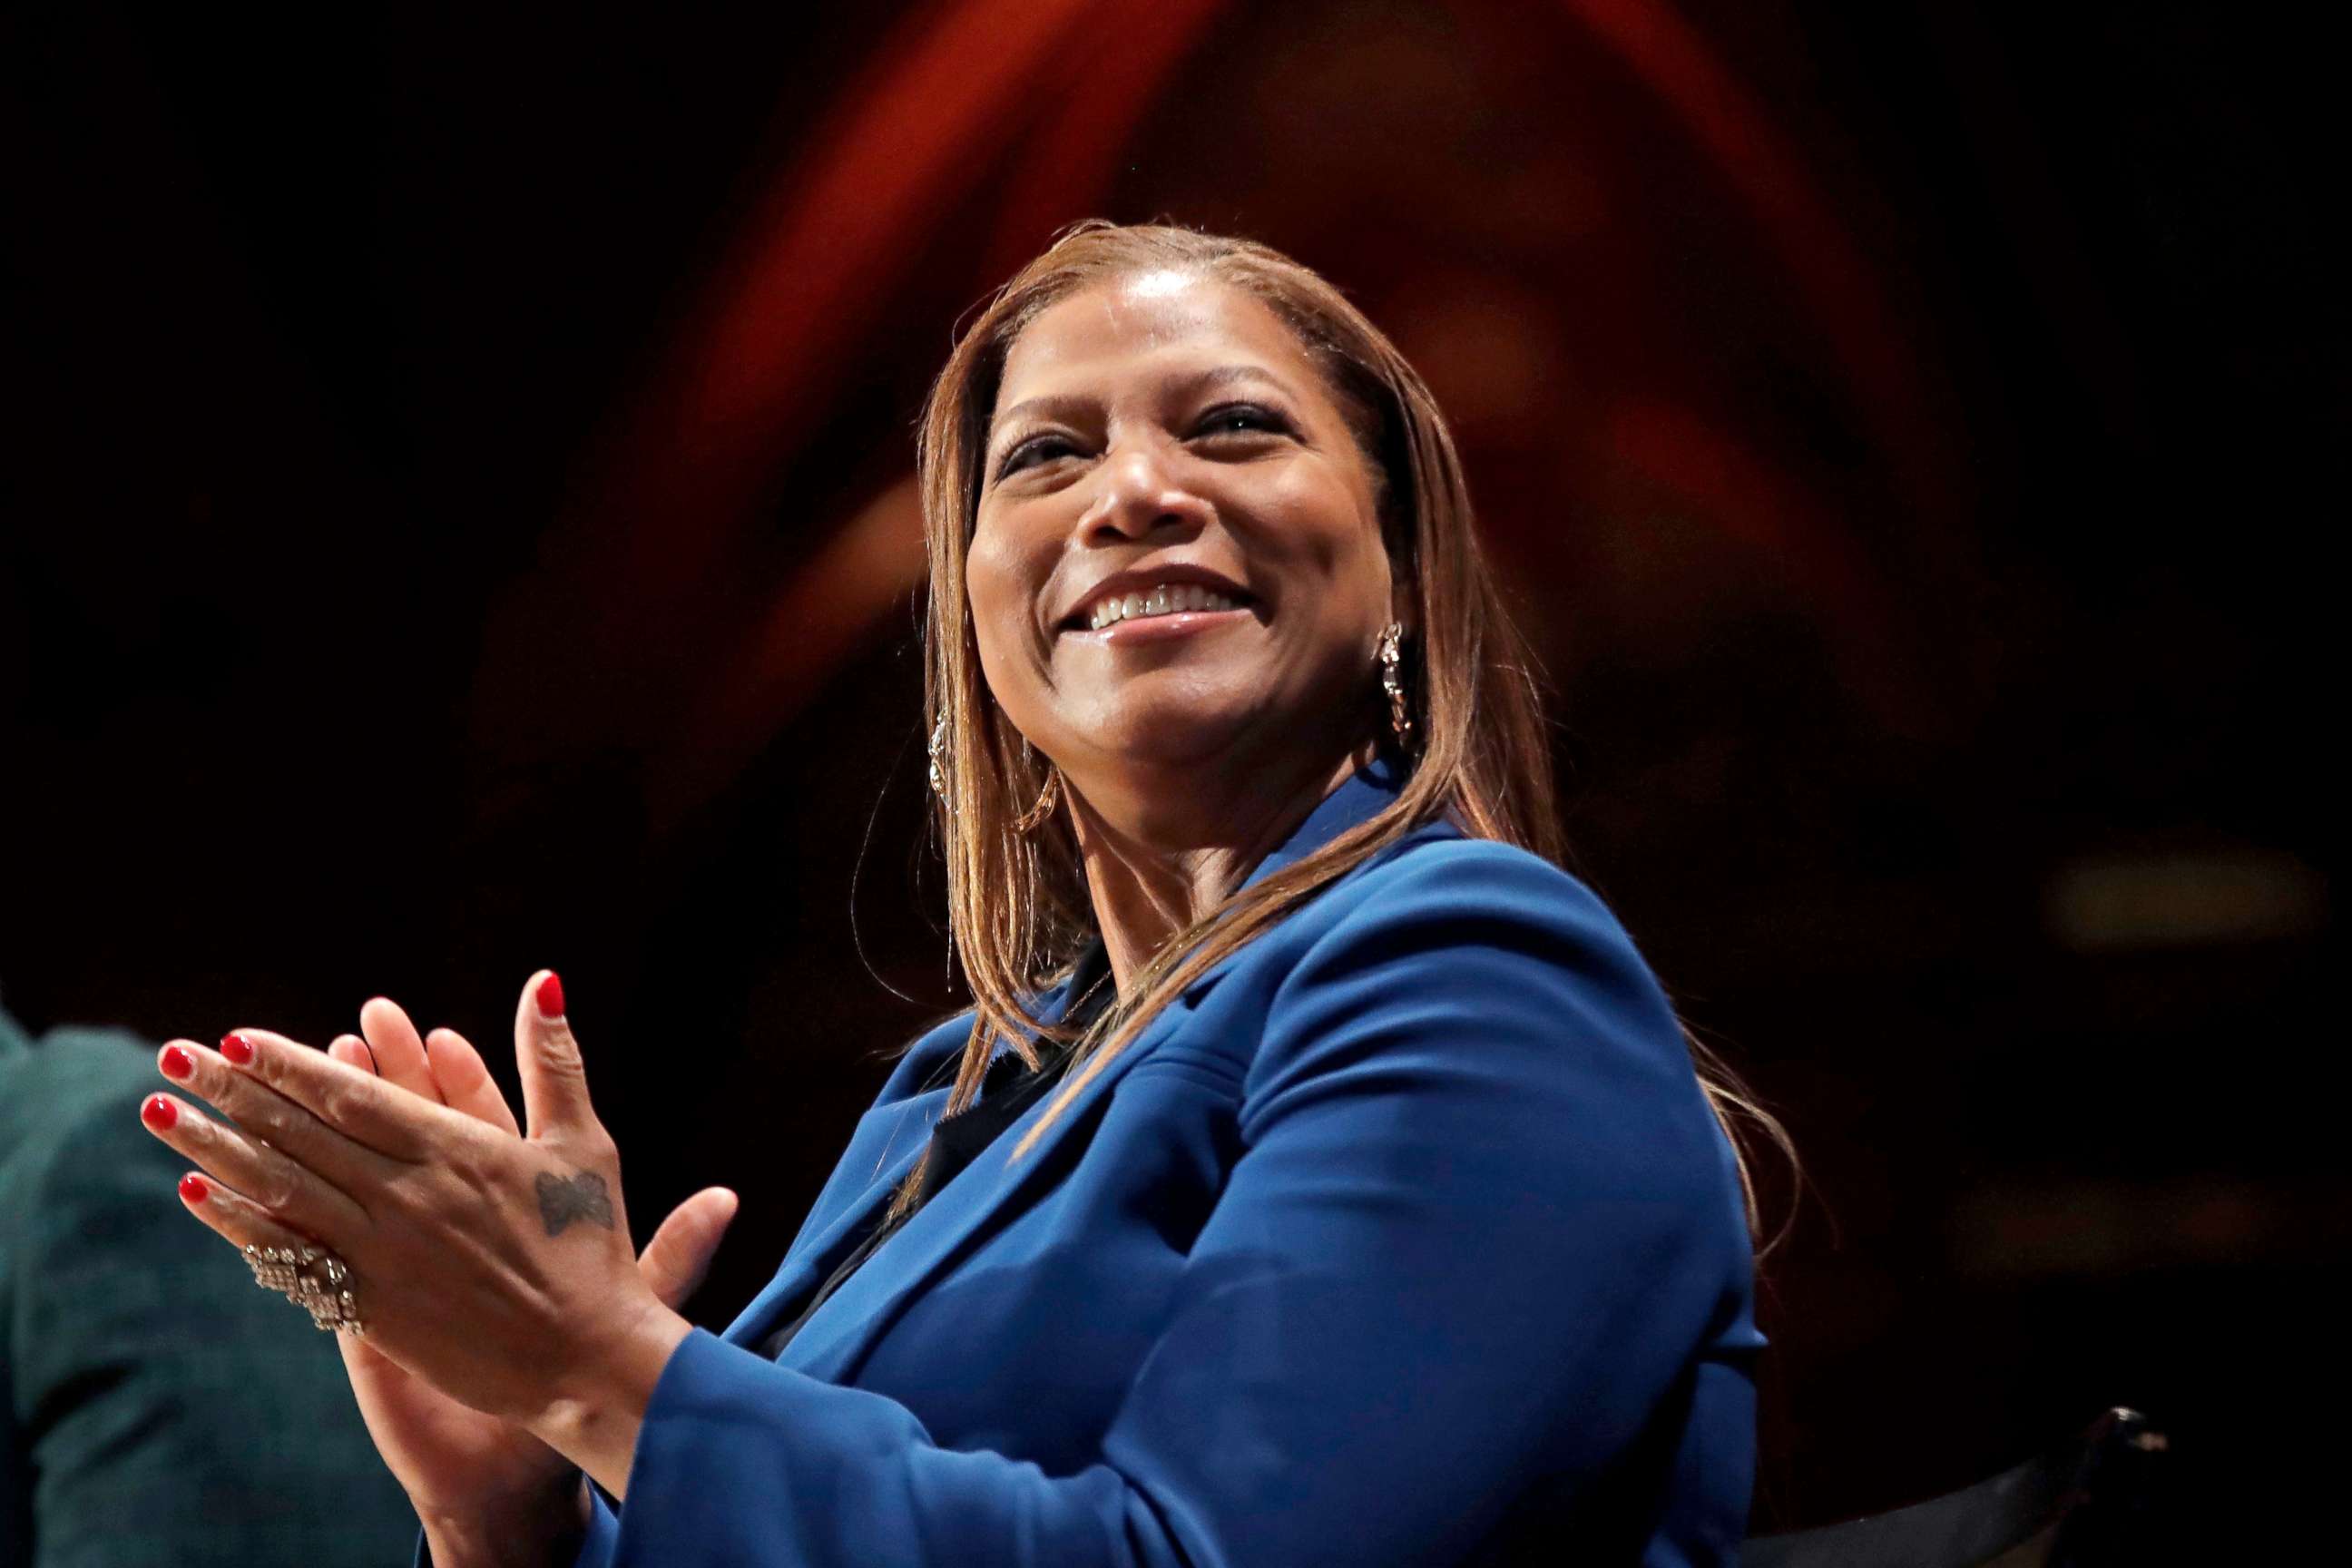 PHOTO: Queen Latifah applauds during ceremonies at Harvard University awarding the W.E.B. Dubois Medals for contributions to black history and culture, Oct. 22, 2019, in Cambridge, Mass.